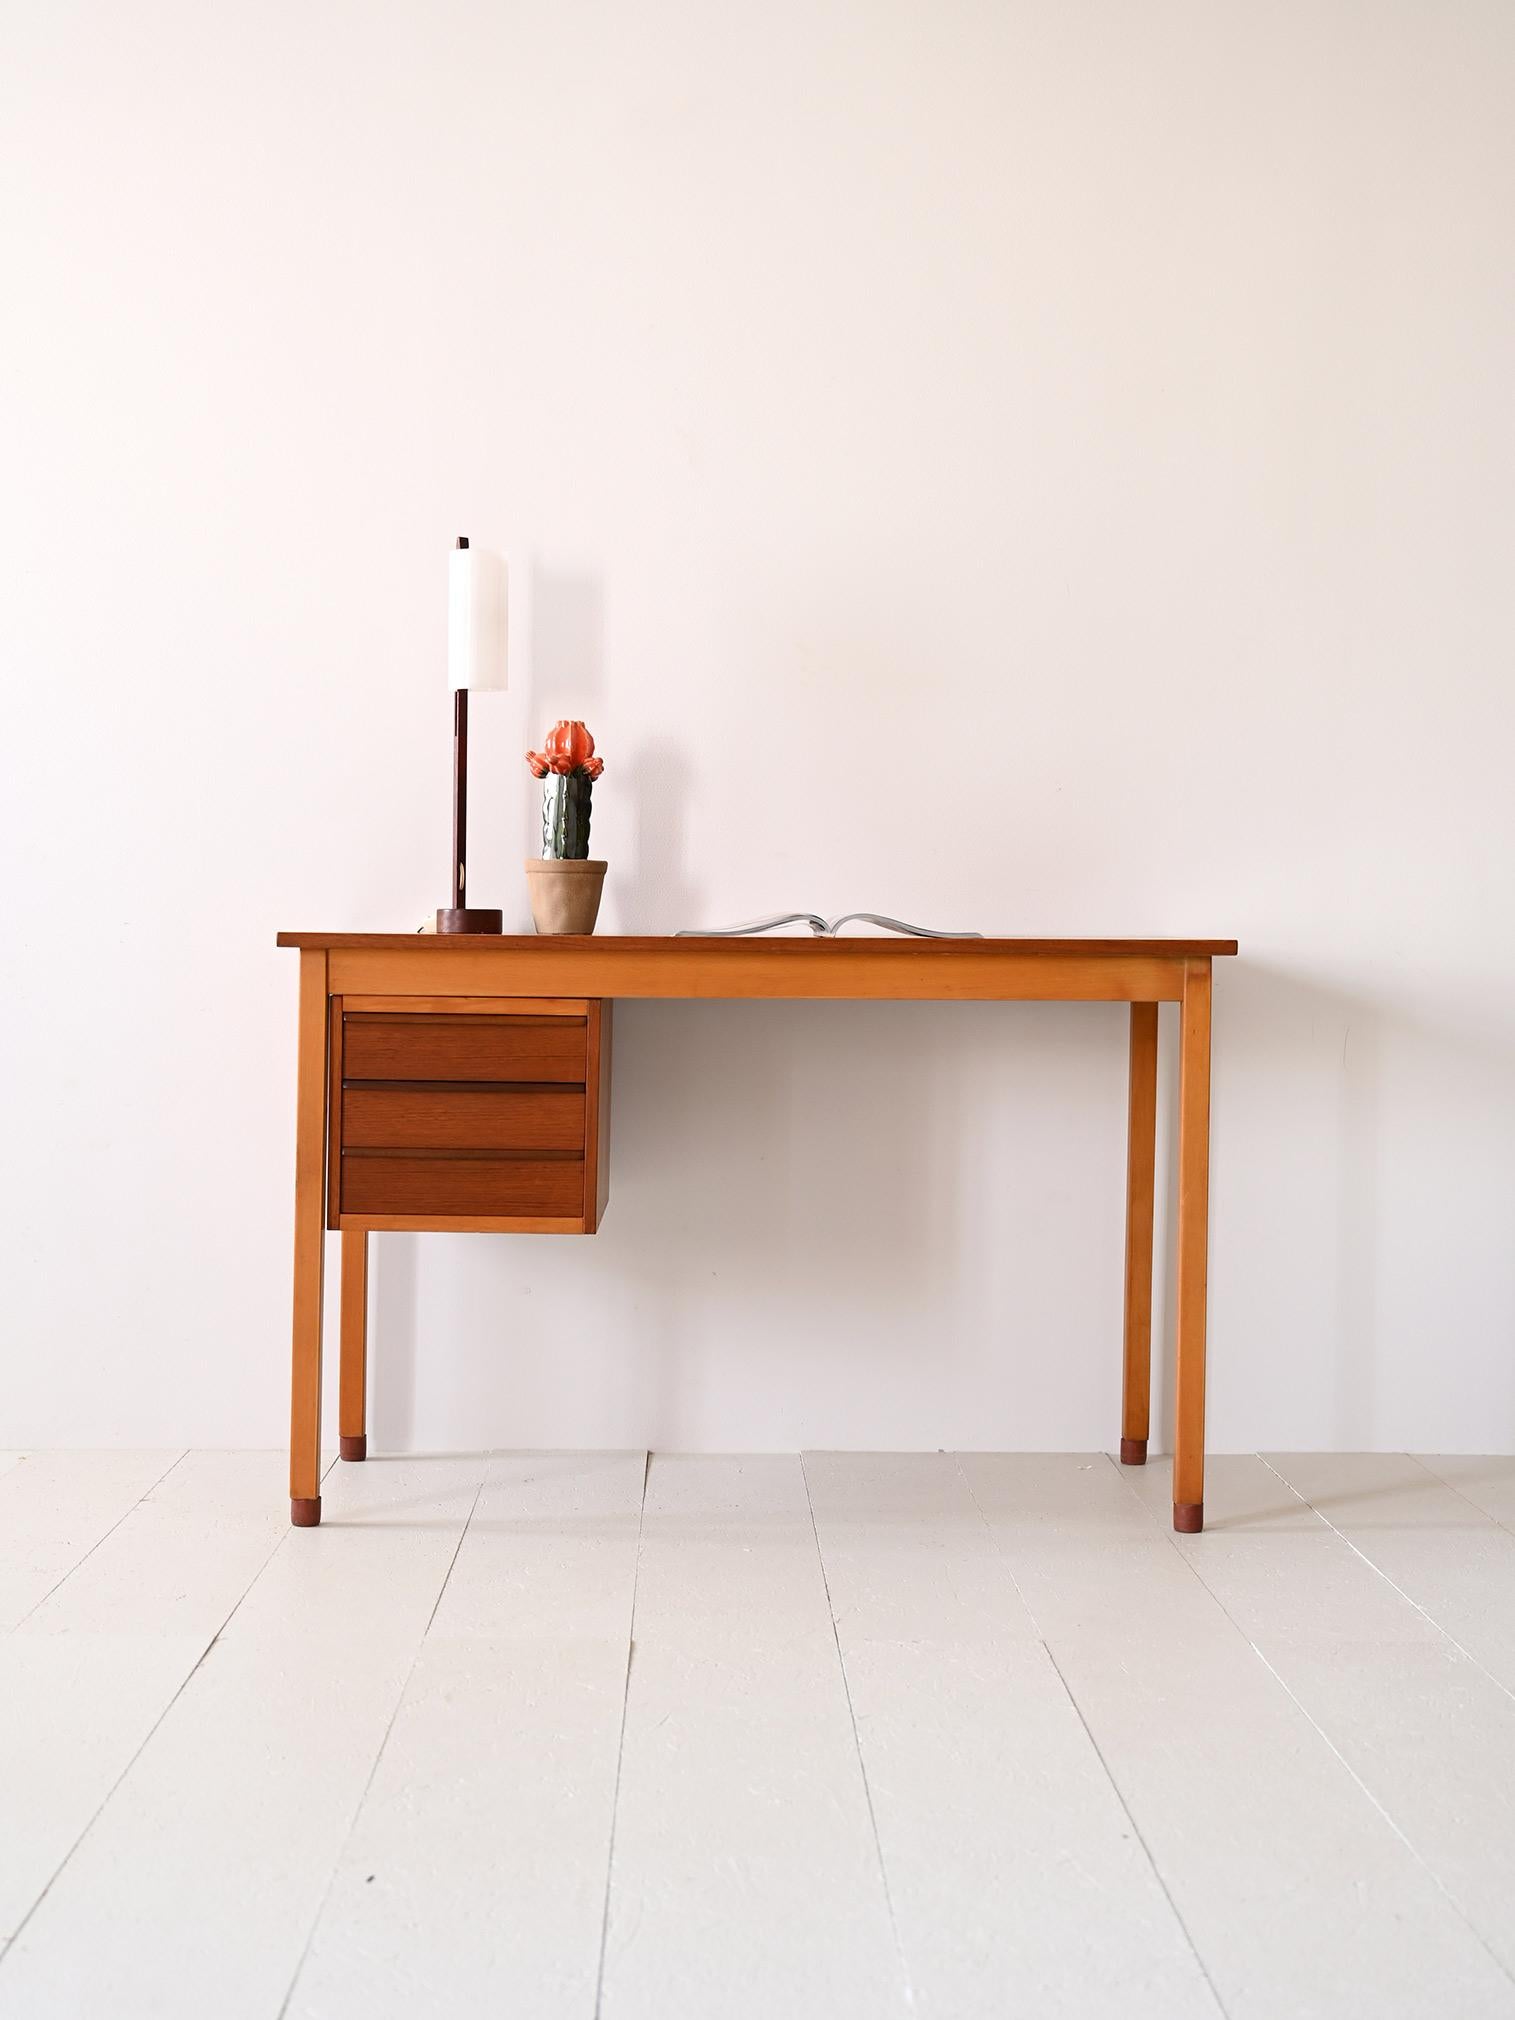 Swedish-made 1960s table with drawers.

This desk with square, minimalist lines features a 125-cm-long rectangular table top under which there are three drawers.  Consisting of a teak frame, it is supported by beech wood legs that create a pleasant